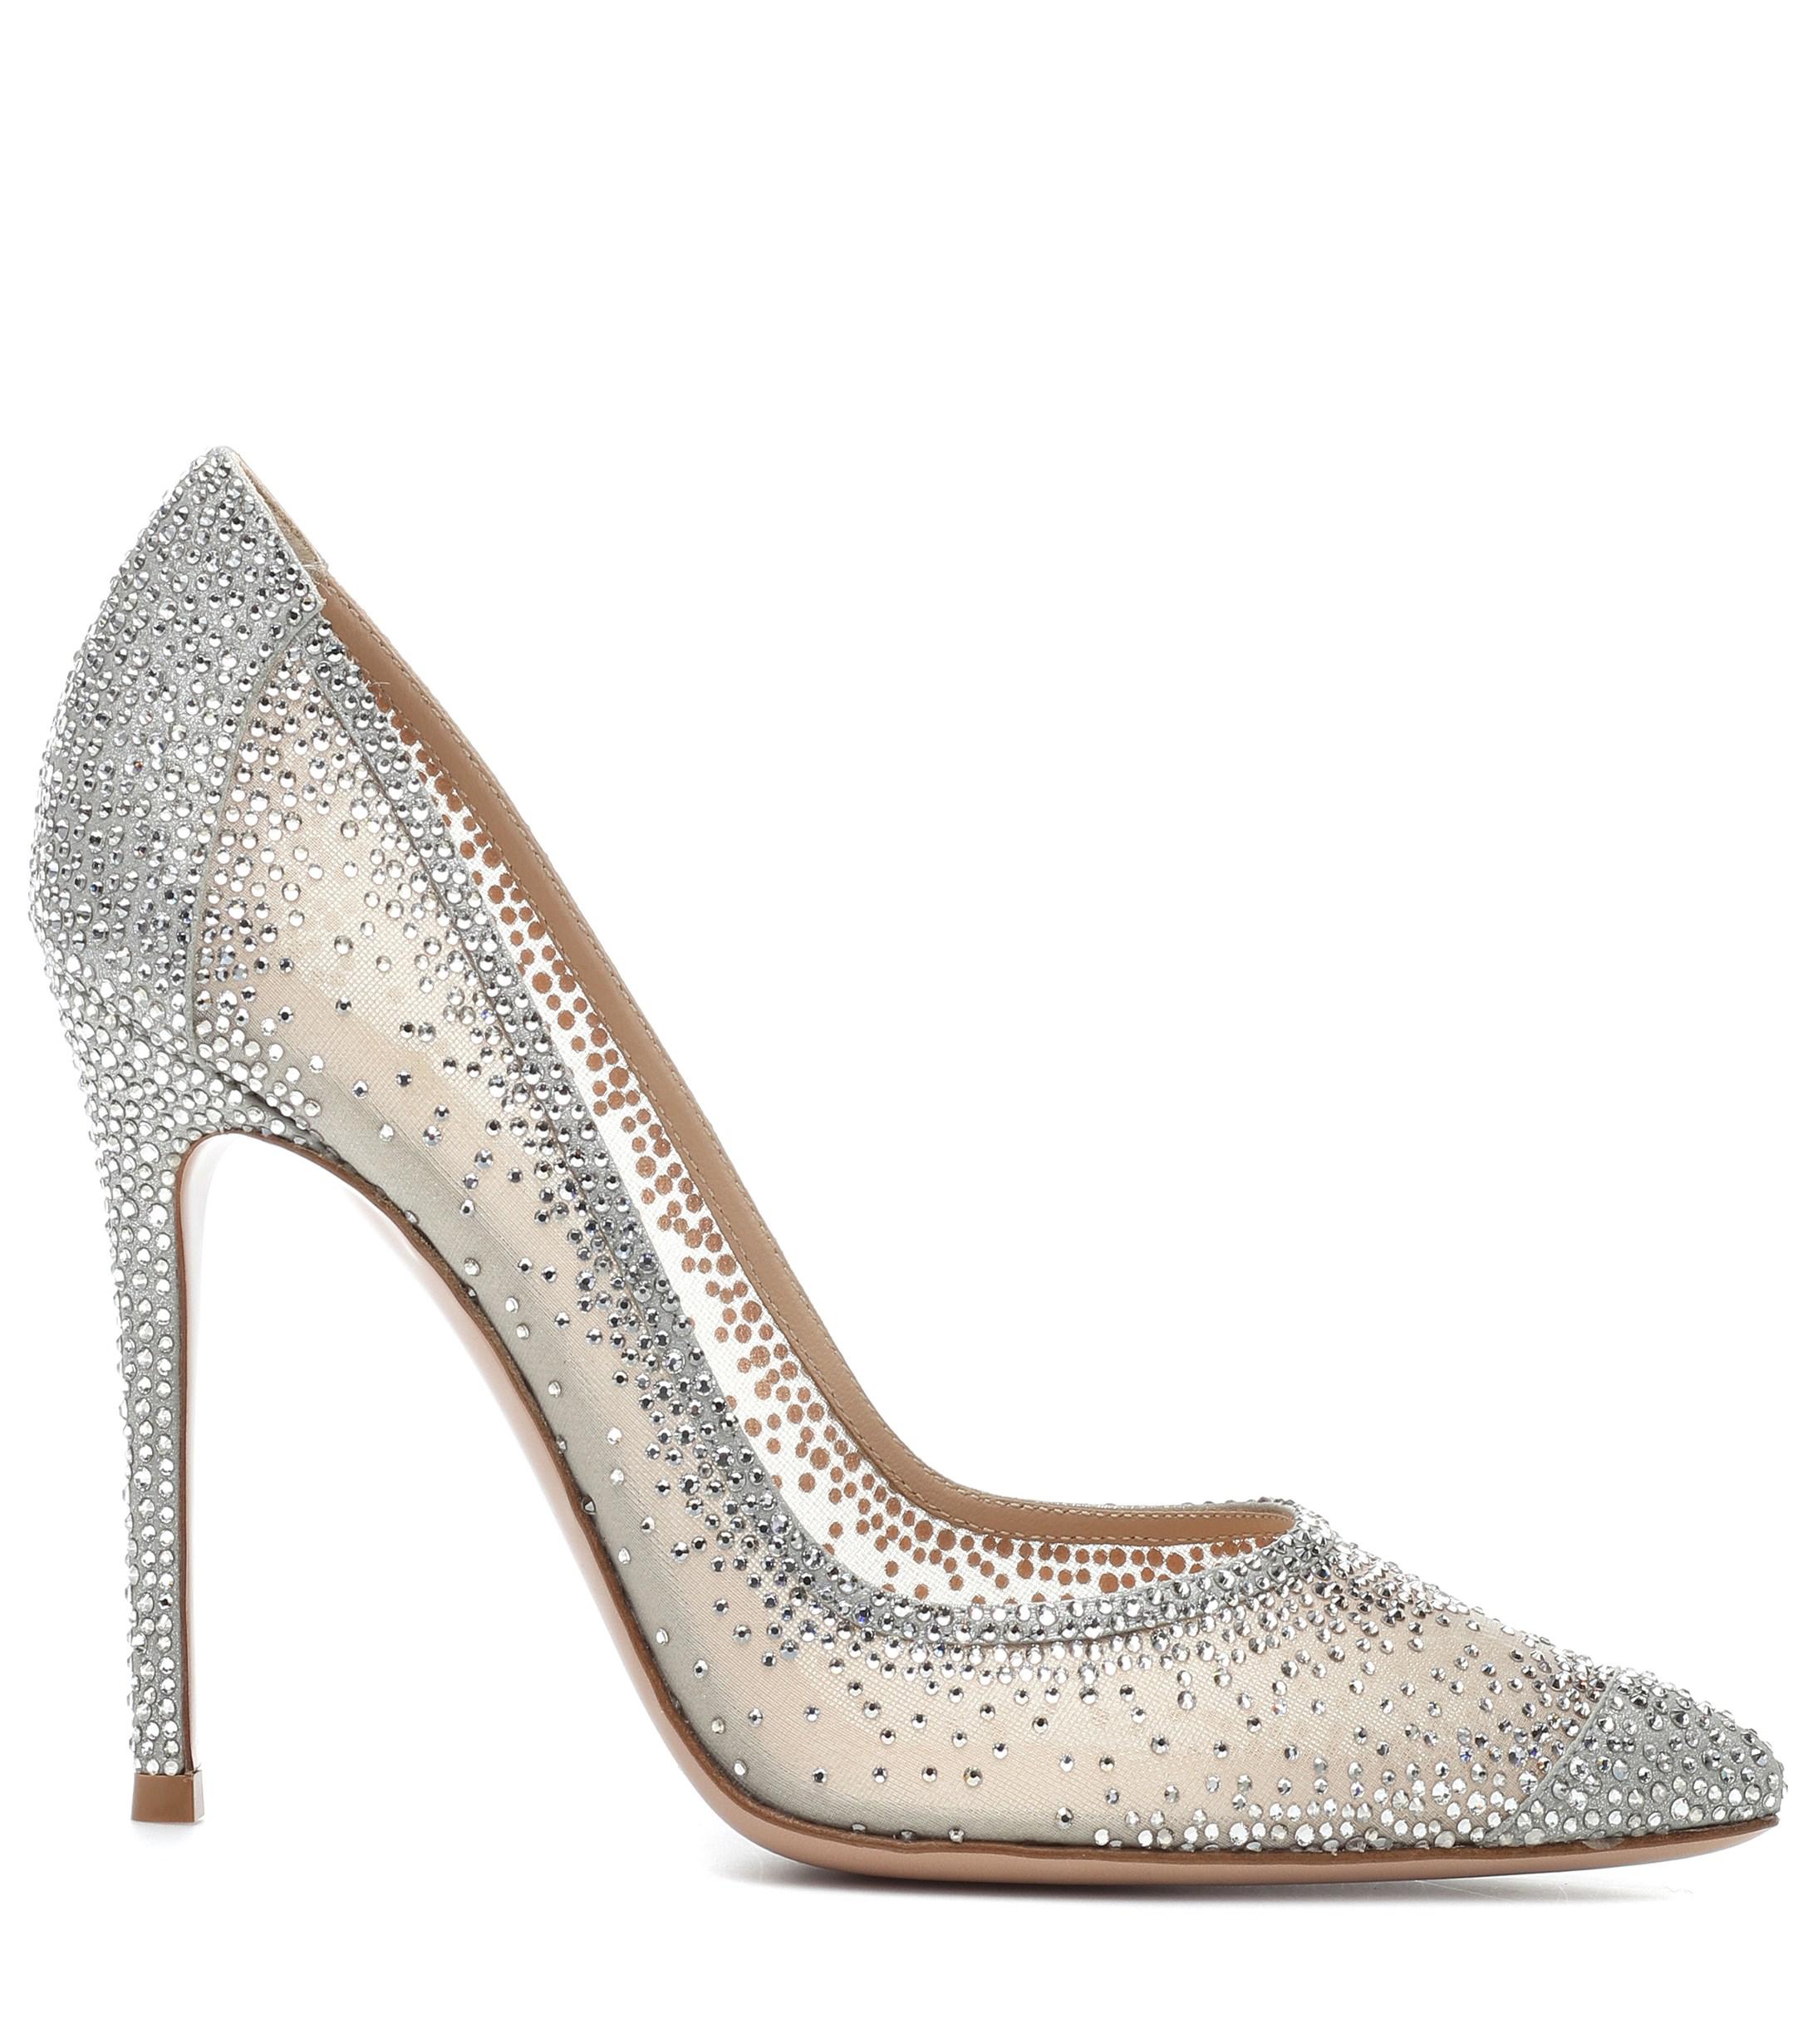 Gianvito Rossi Leather Rania 105 Crystal-embellished Pumps in Silver ...